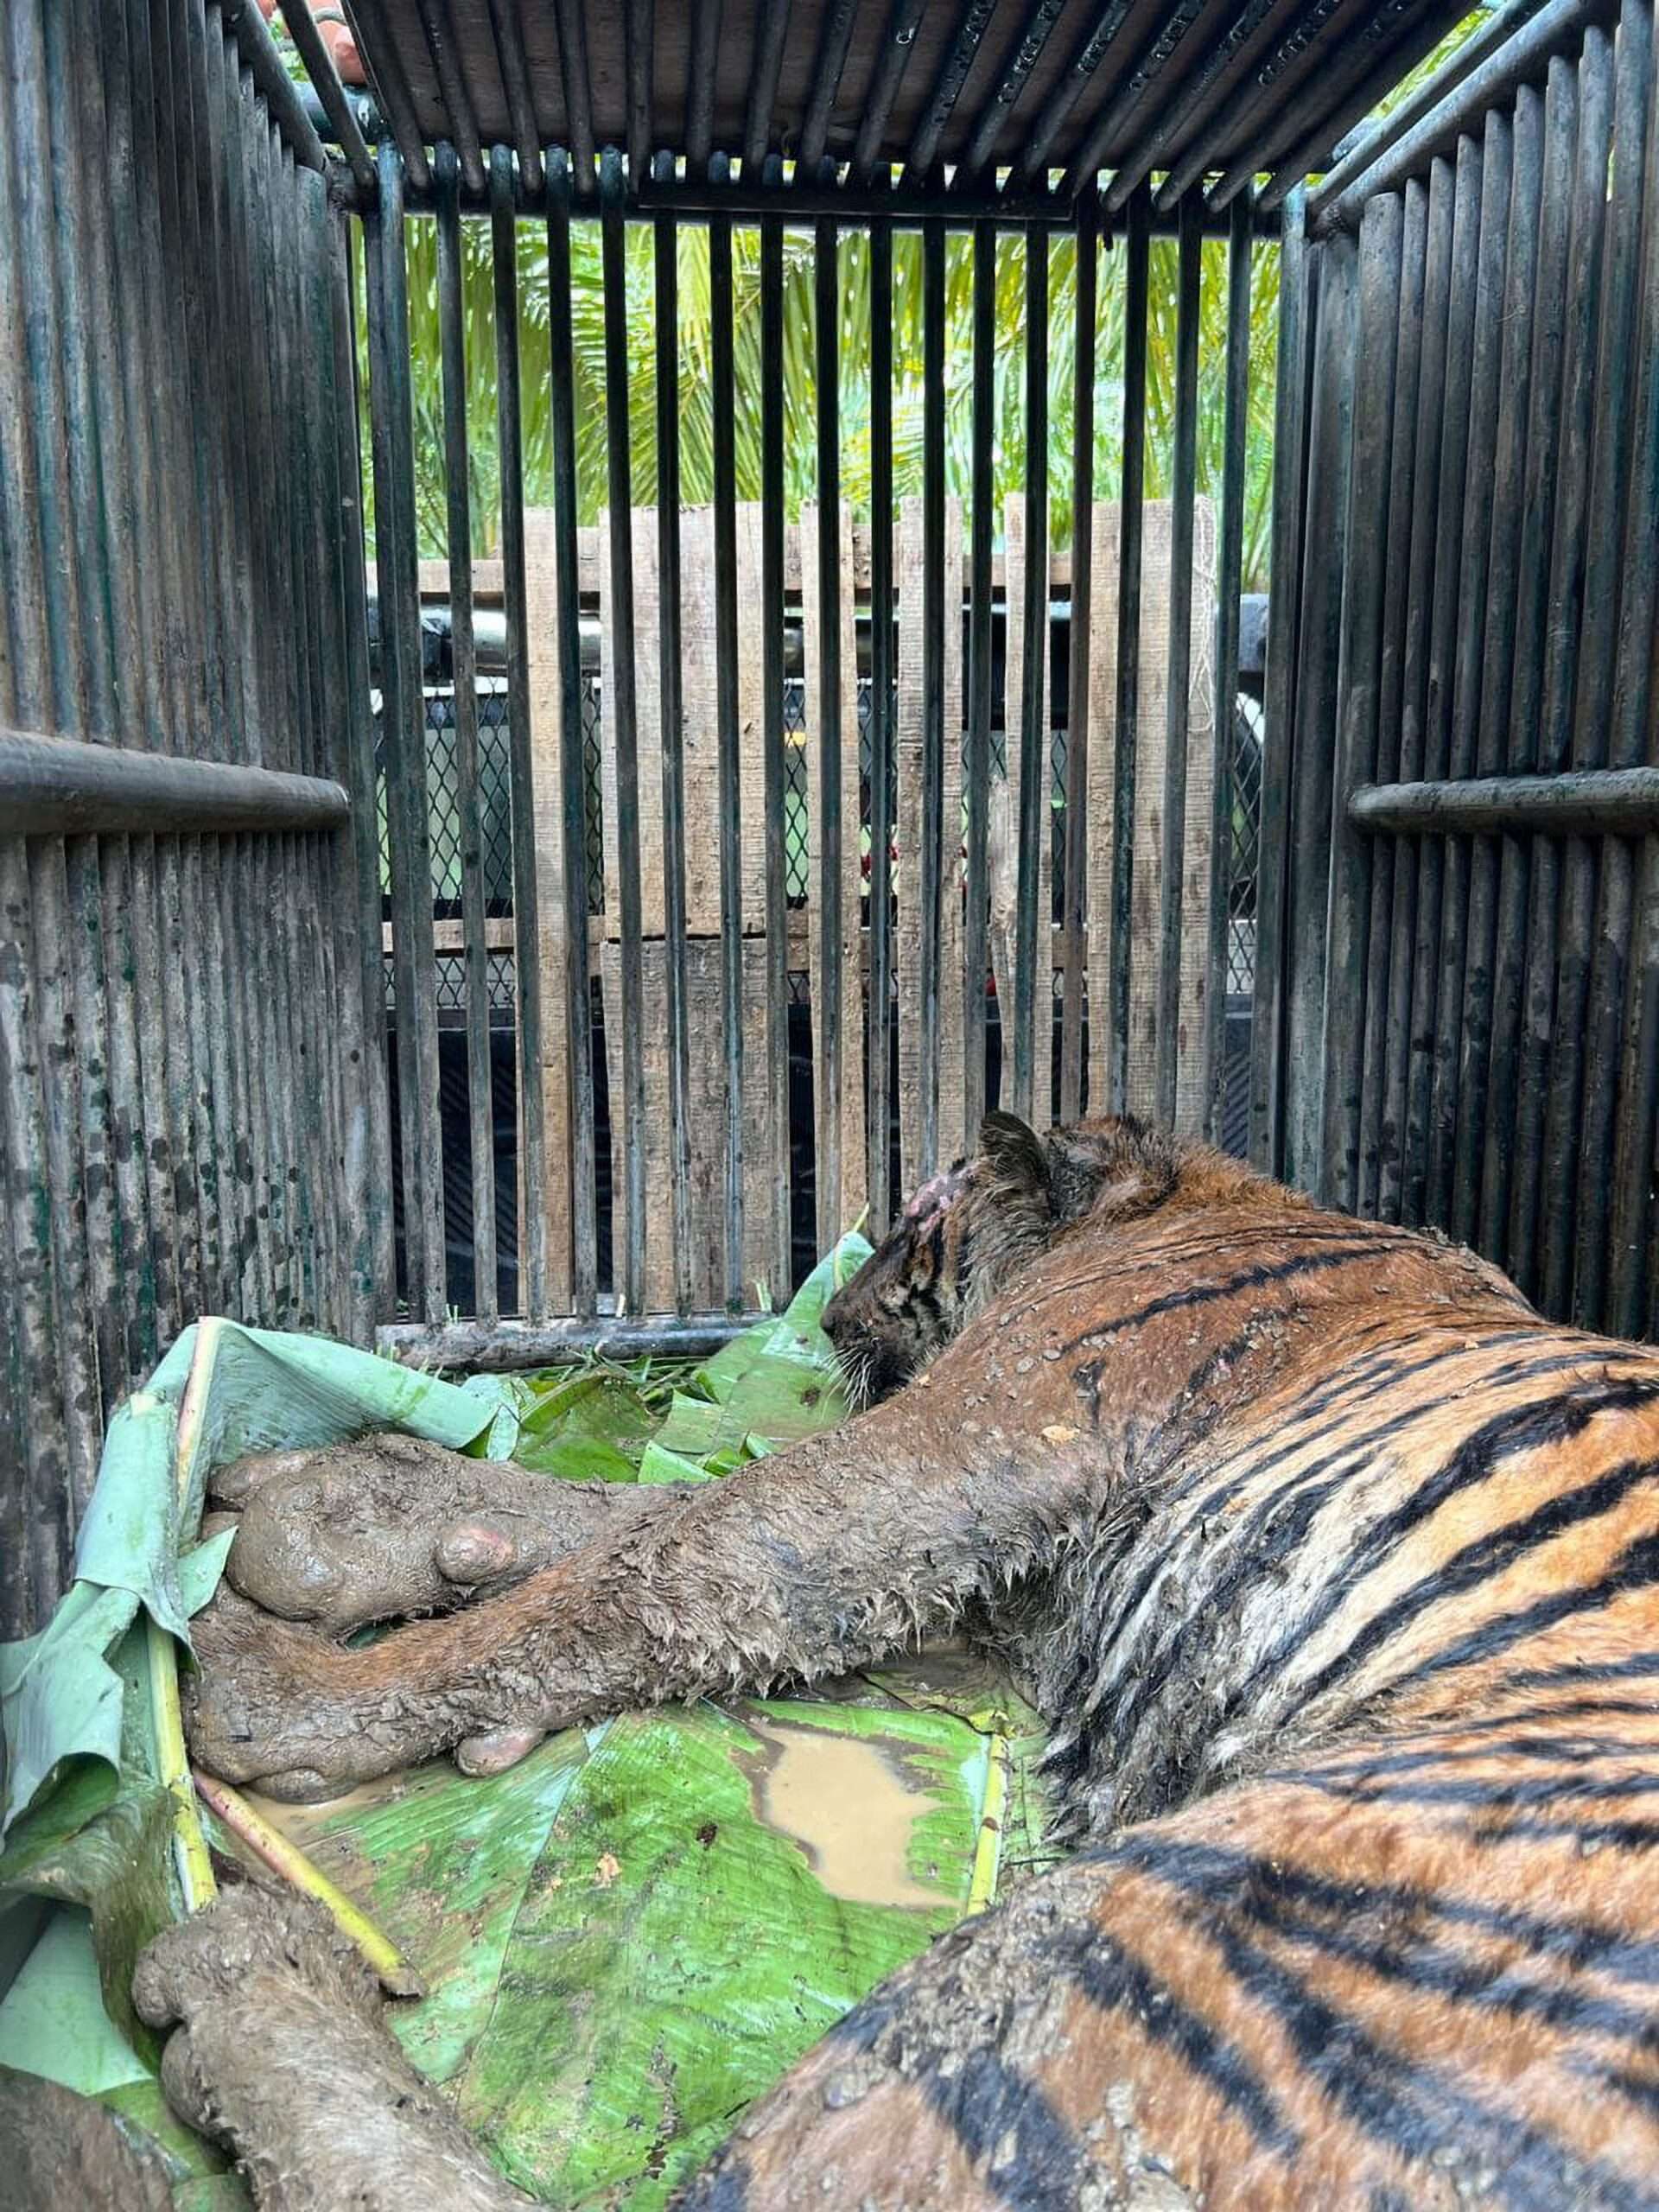 Read more about the article Man-Eating Tiger That Killed Three Hosed Down After Capture